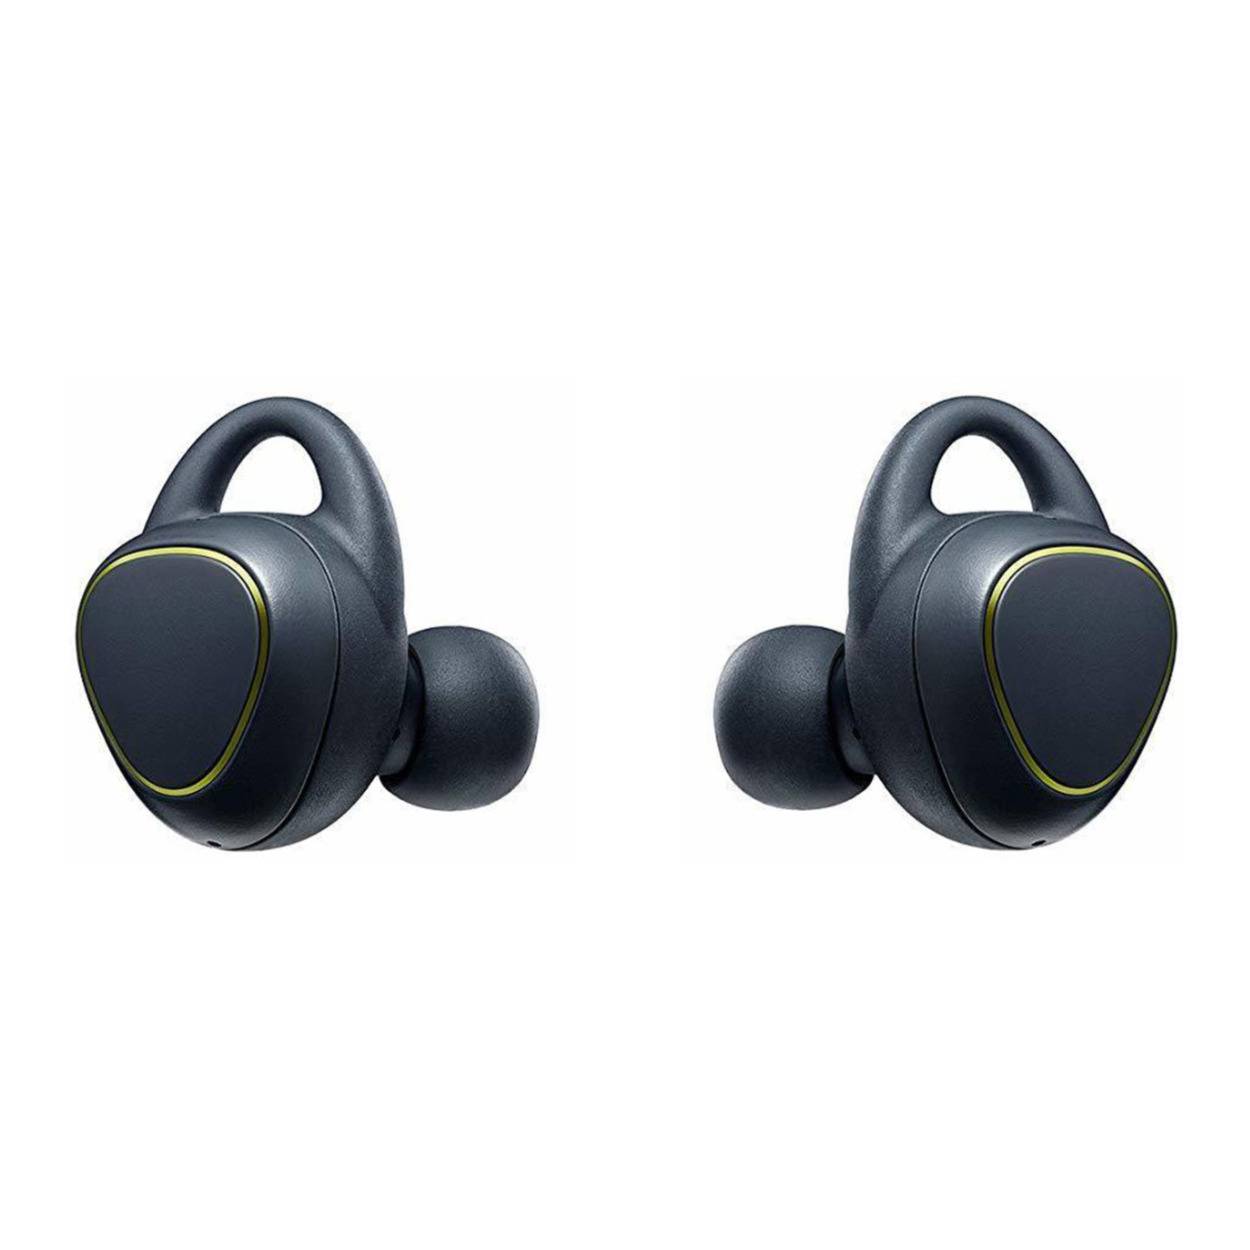 Samsung Gear IconX Cordfree Earbuds with Activity Tracker (Black, 2016)